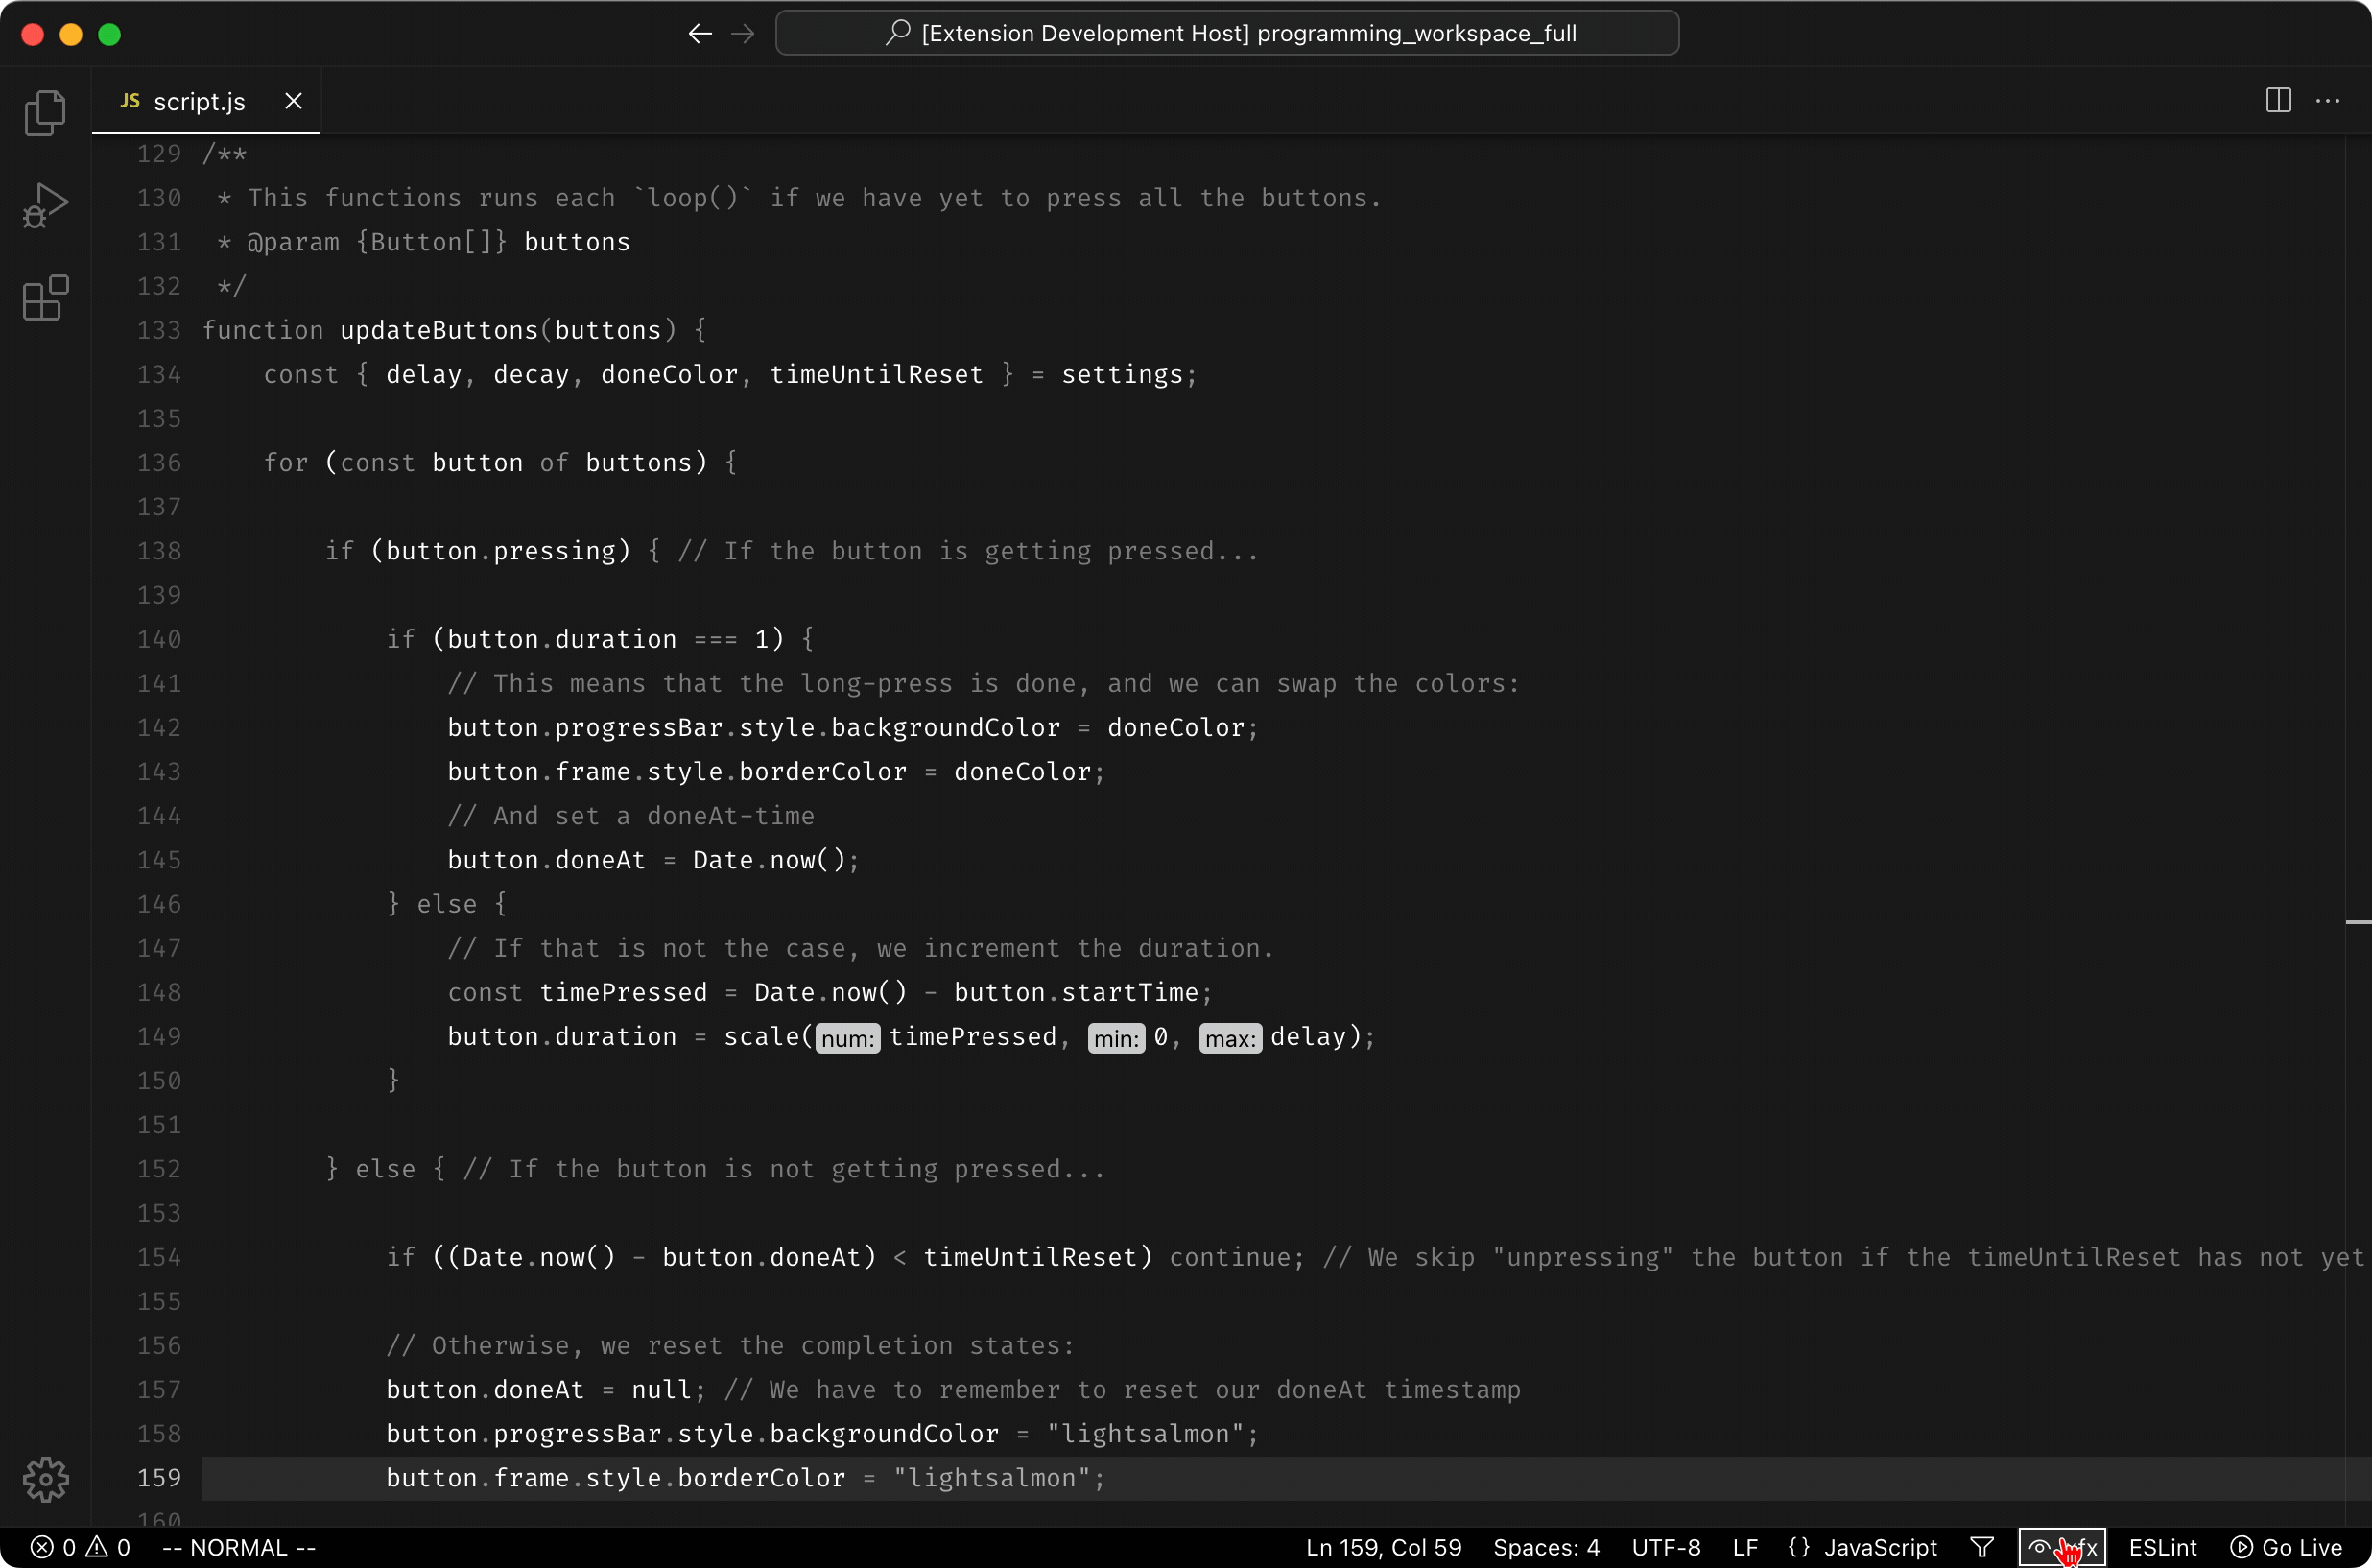 A screenshot of ixfx Highlight running in VS Code with a light theme.